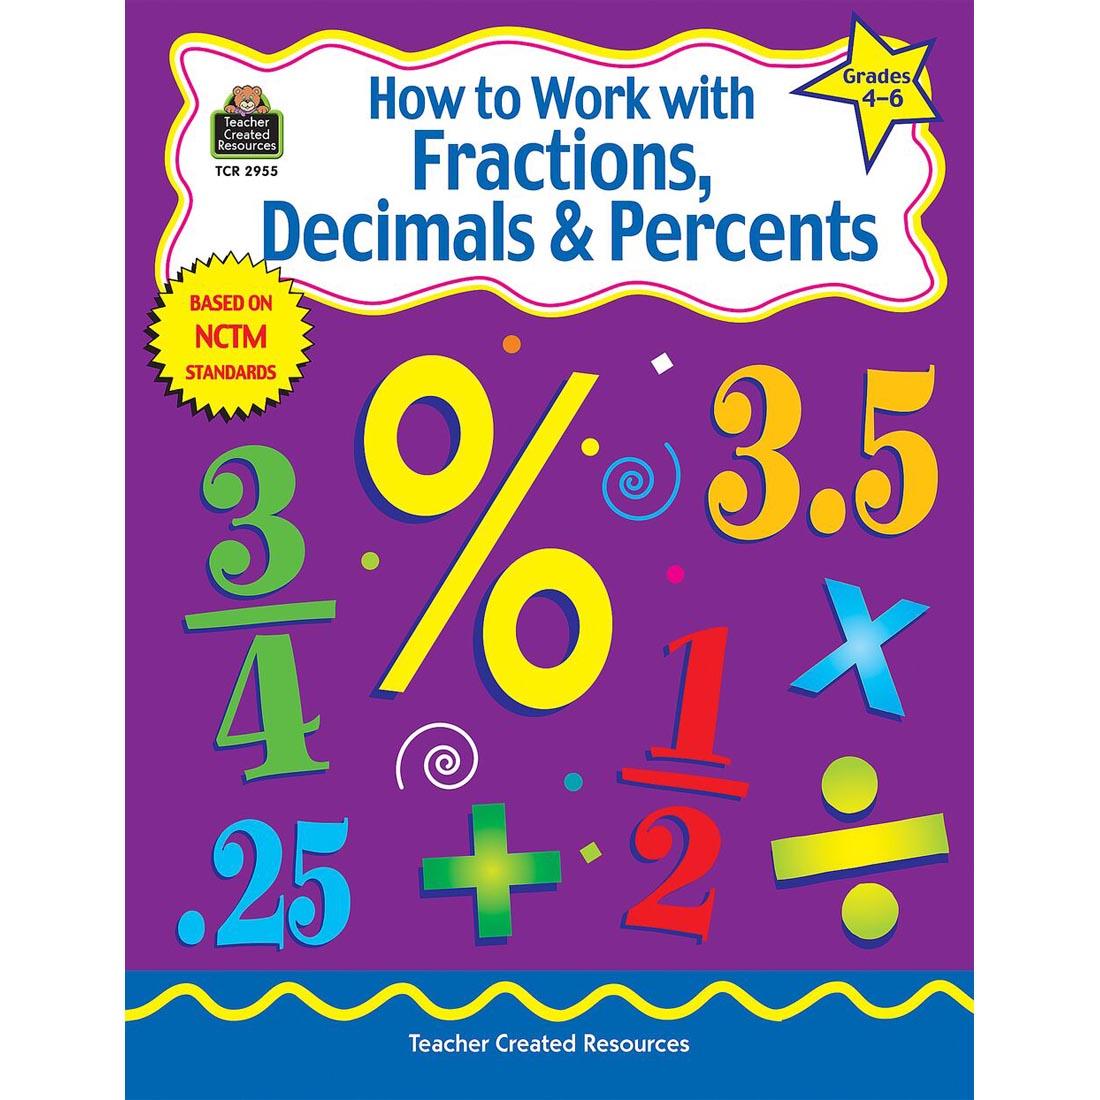 How to Work with Fractions, Decimals & Percents Grades 4-6